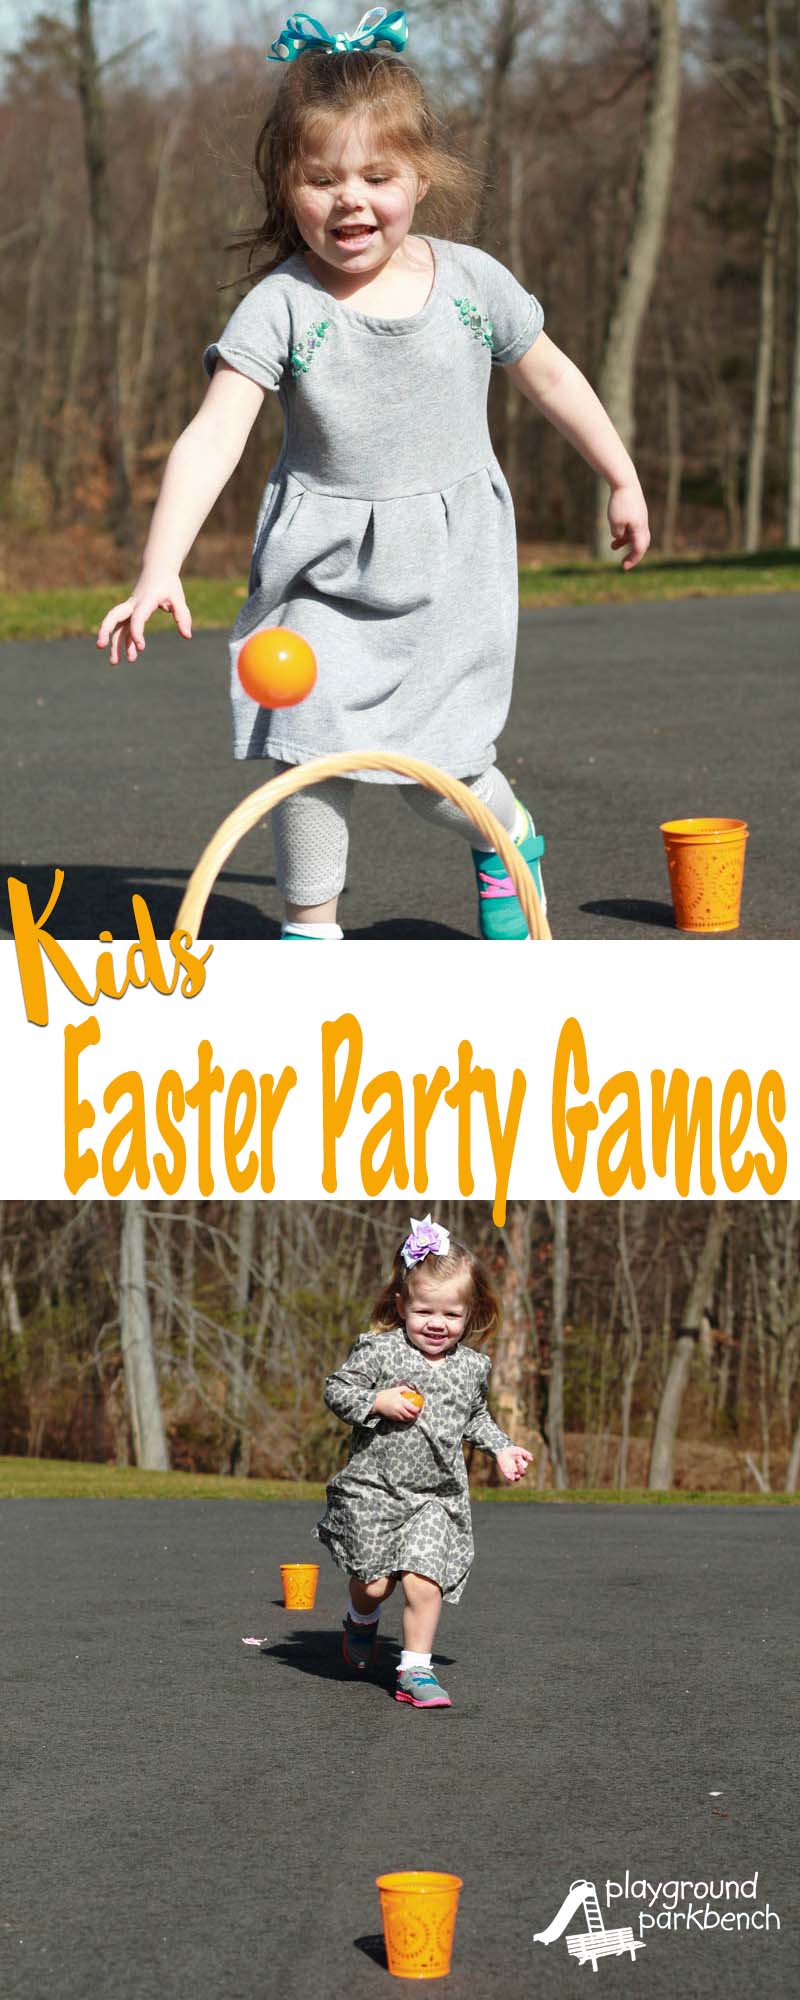 Need some party game ideas or gross motor challenges for your child's Easter Party?  These Kids Easter Party Games are sure to get your toddler or preschooler moving, and burn off all their chocolate bunny sugar high!  Great for preschool parties or Easter Sunday after the egg hunt. | Easter | Easter Games | For Kids | Gross Motor Skills | Toddlers | Preschool